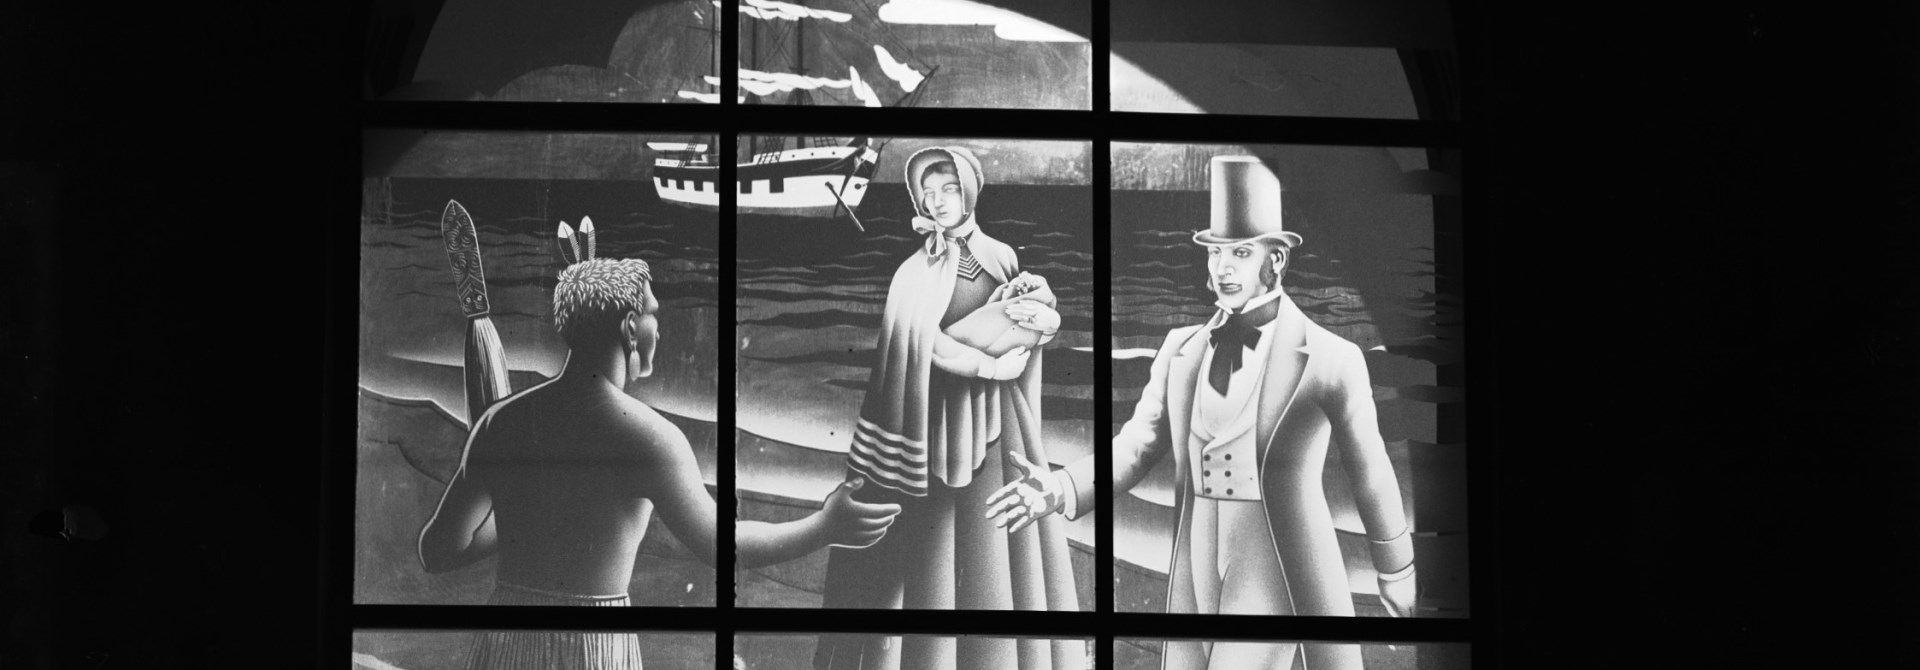 Black and white image of stain glass window showing Māori man on beach greeting pakeha man with woman holding baby with a ship in the foreground.